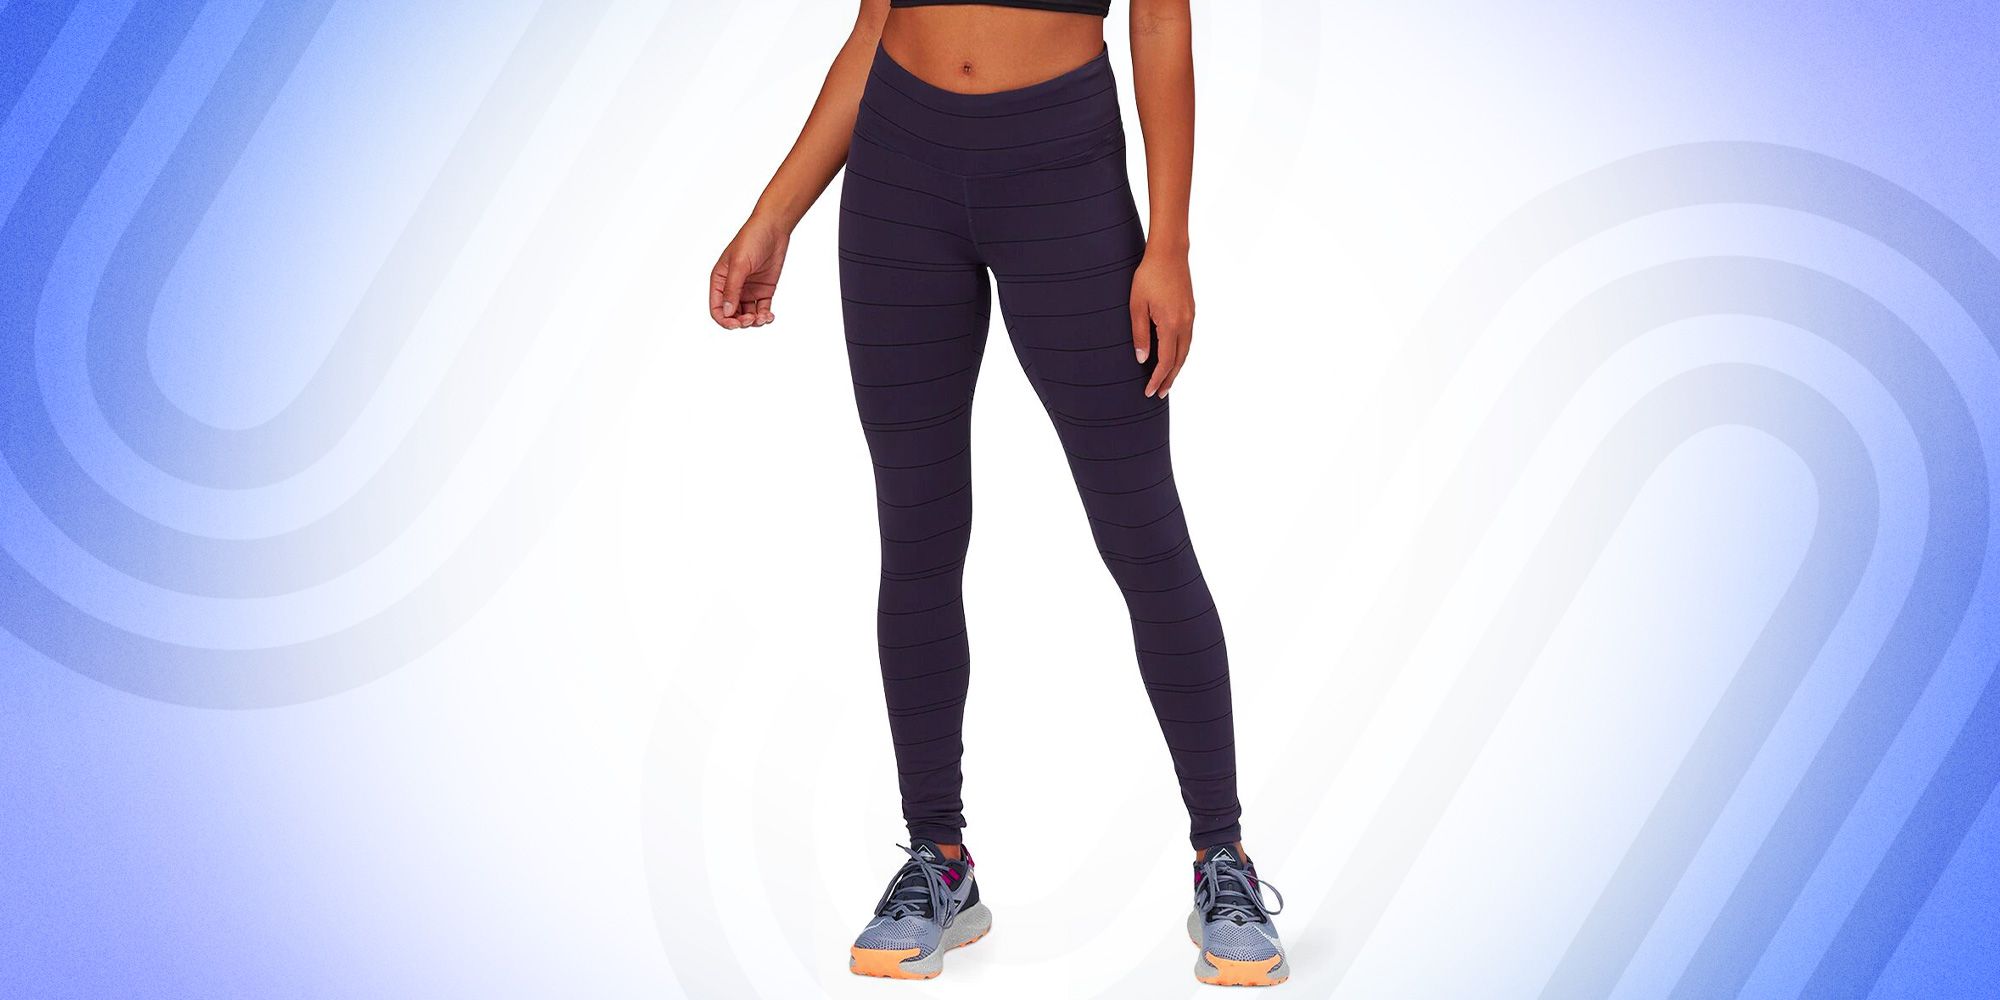 TALA. Activewear you'll feel good in, and good about.